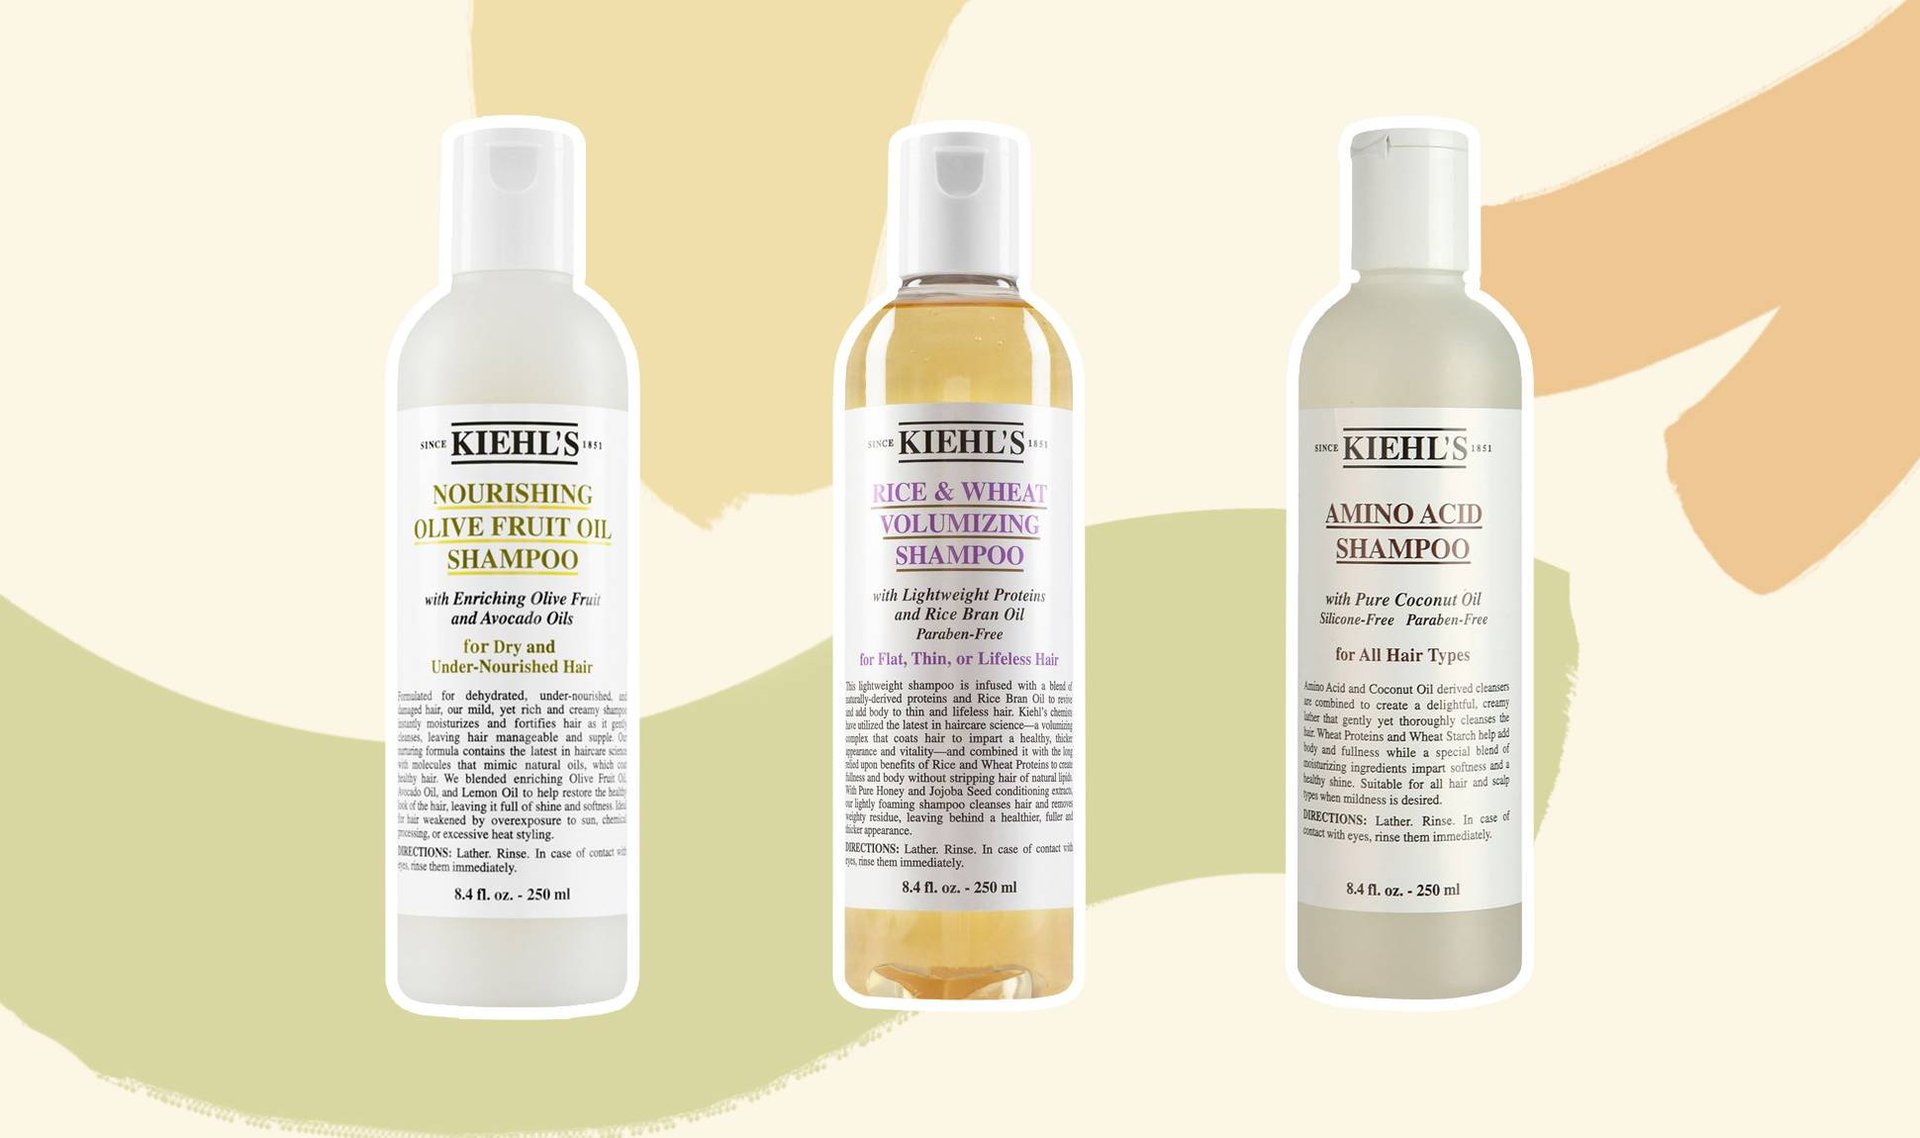 Our Haircare Routine For Thin and Lifeless Hair - Kiehl's